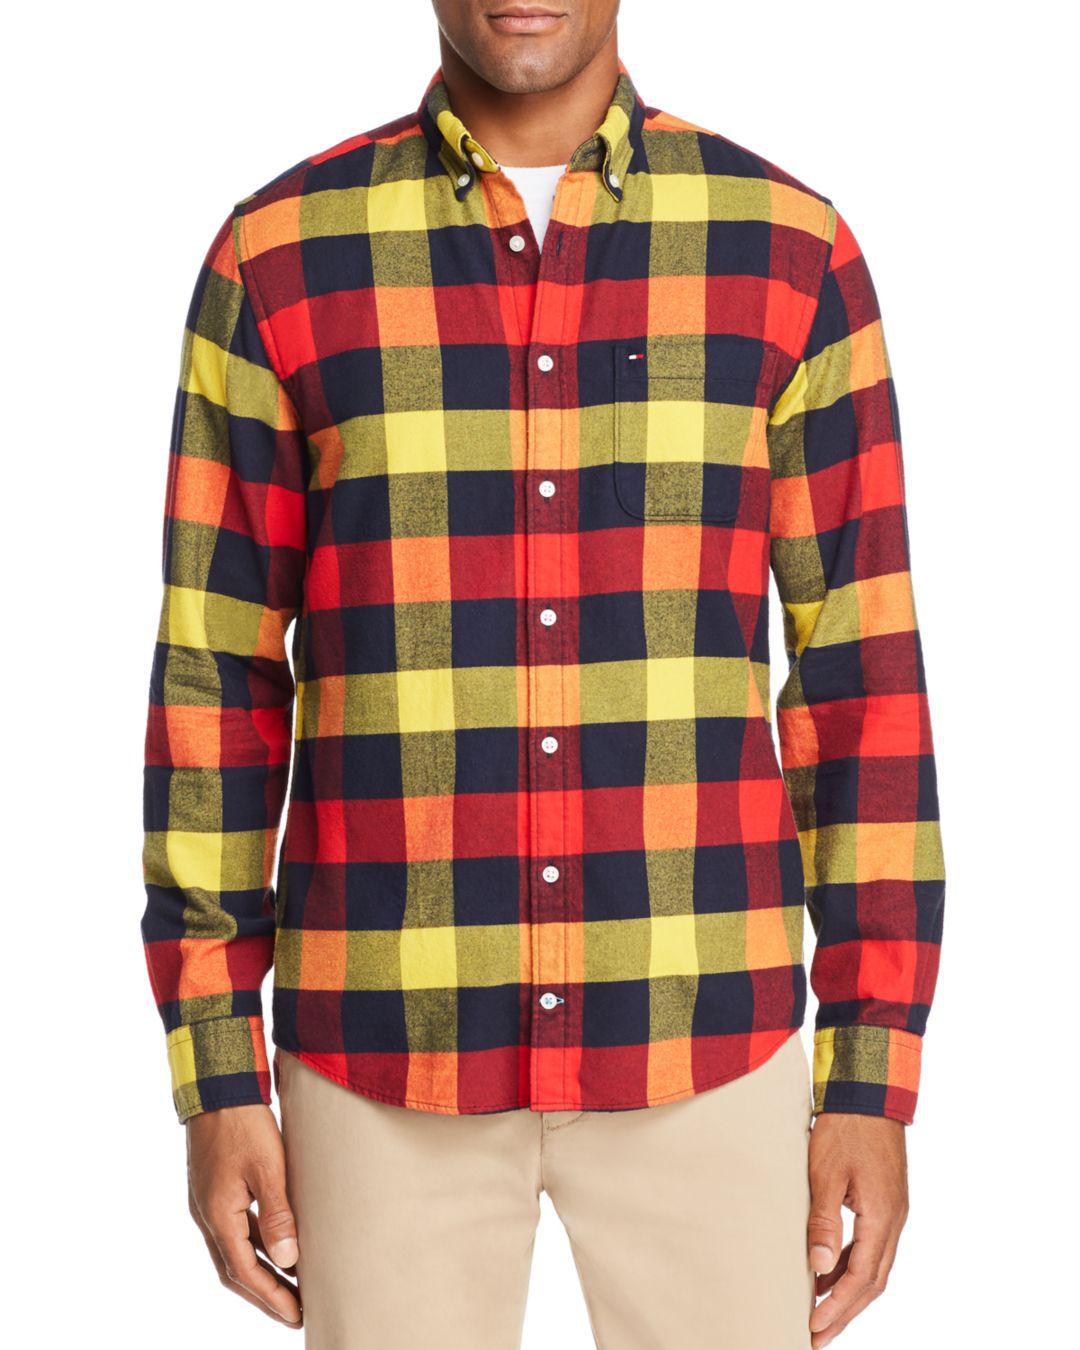 Tommy Hilfiger Buffalo Check Flannel Button-down Shirt for Men - Lyst